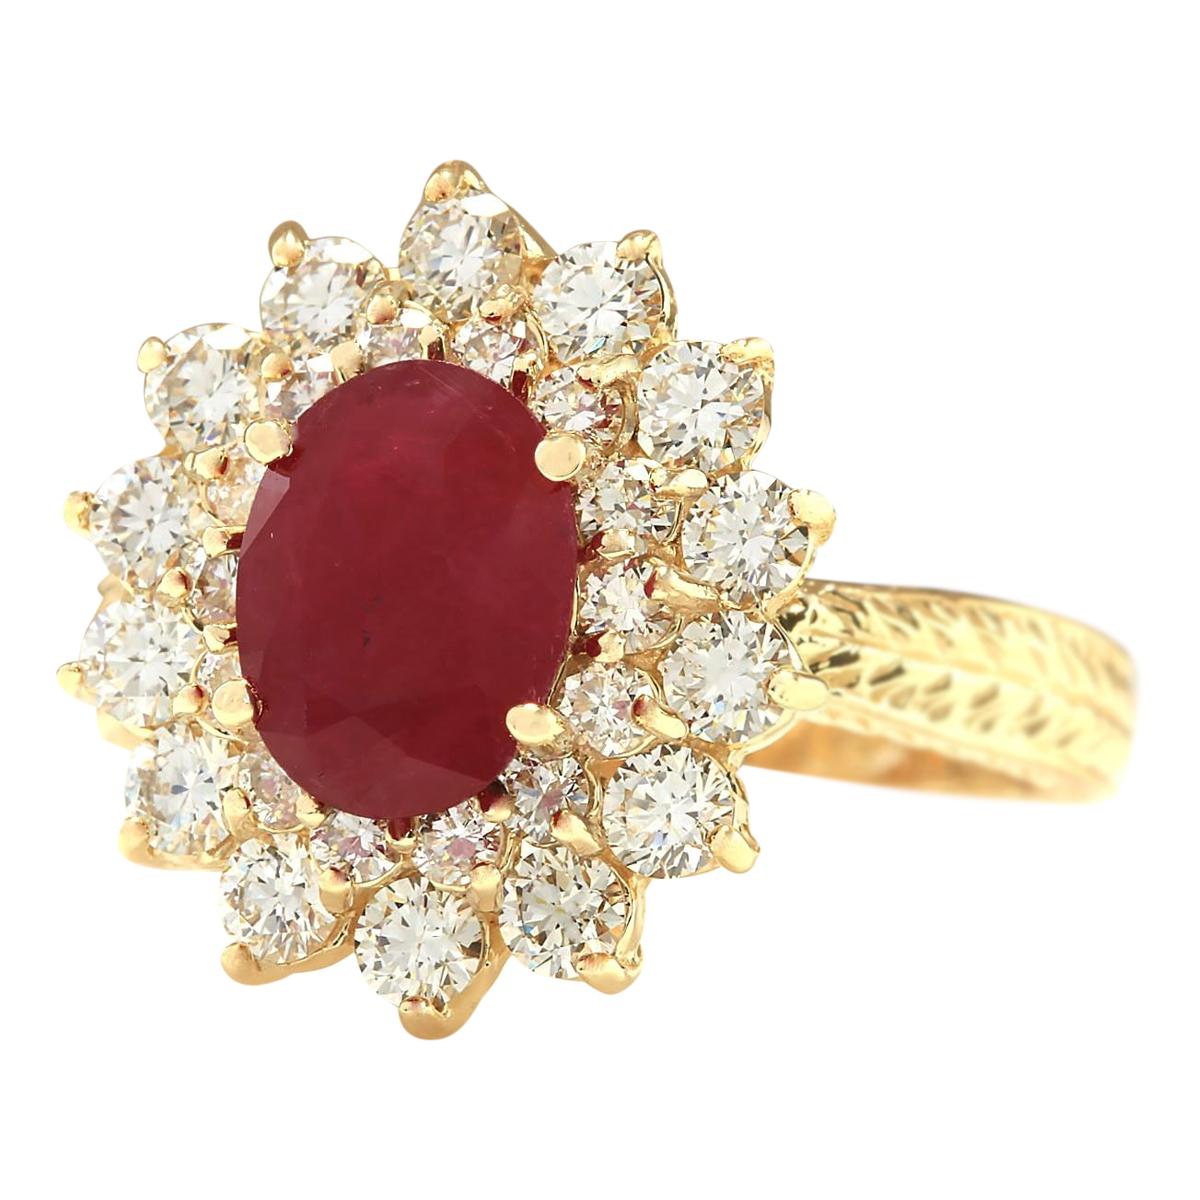 Stamped: 14K Yellow Gold
Total Ring Weight: 5.2 Grams
Total Natural Ruby Weight is 1.86 Carat (Measures: 9.00x7.00 mm)
Color: Red
Total Natural Diamond Weight is 1.30 Carat
Color: F-G, Clarity: VS2-SI1
Face Measures: 17.00x15.50 mm
Sku: [703738W]